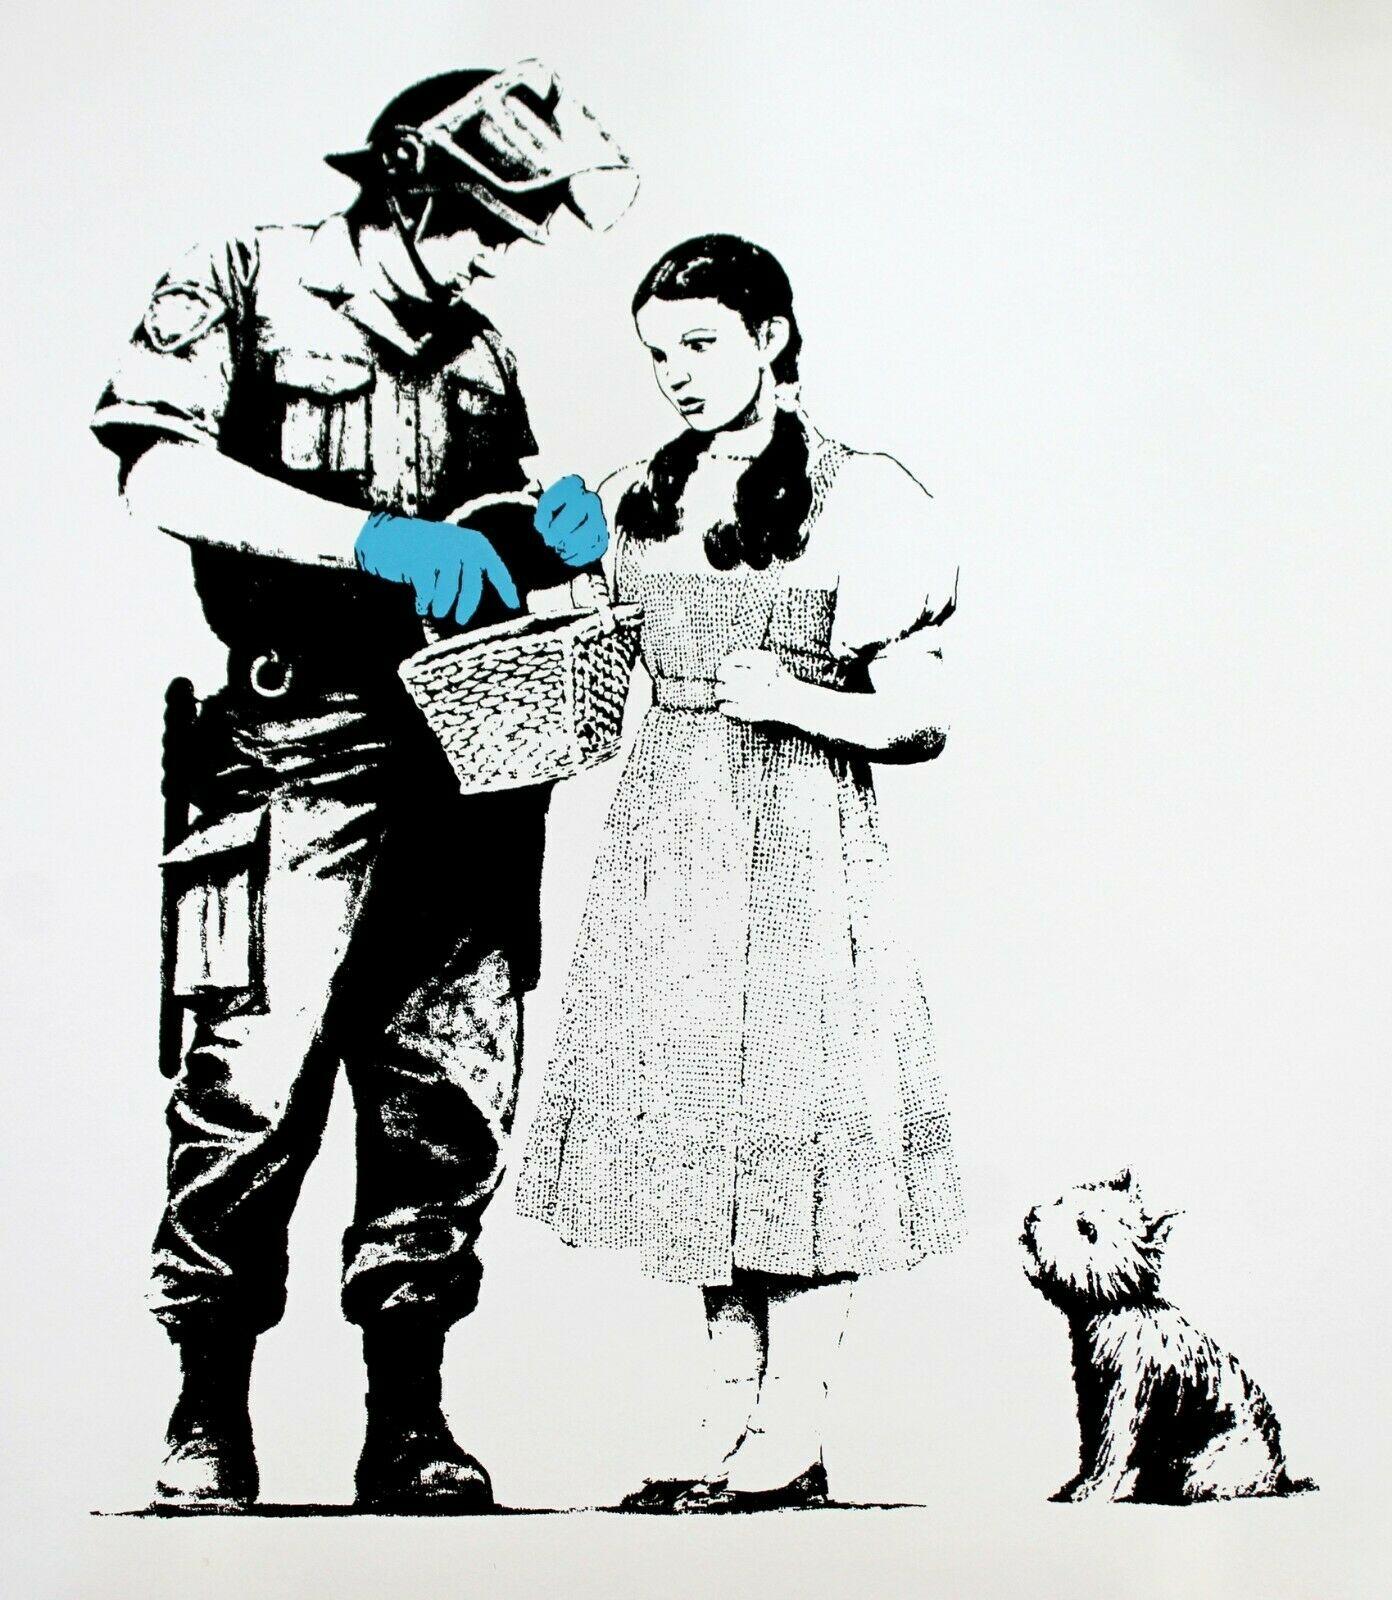 For your consideration is an unframed screenprint of Bansky's 